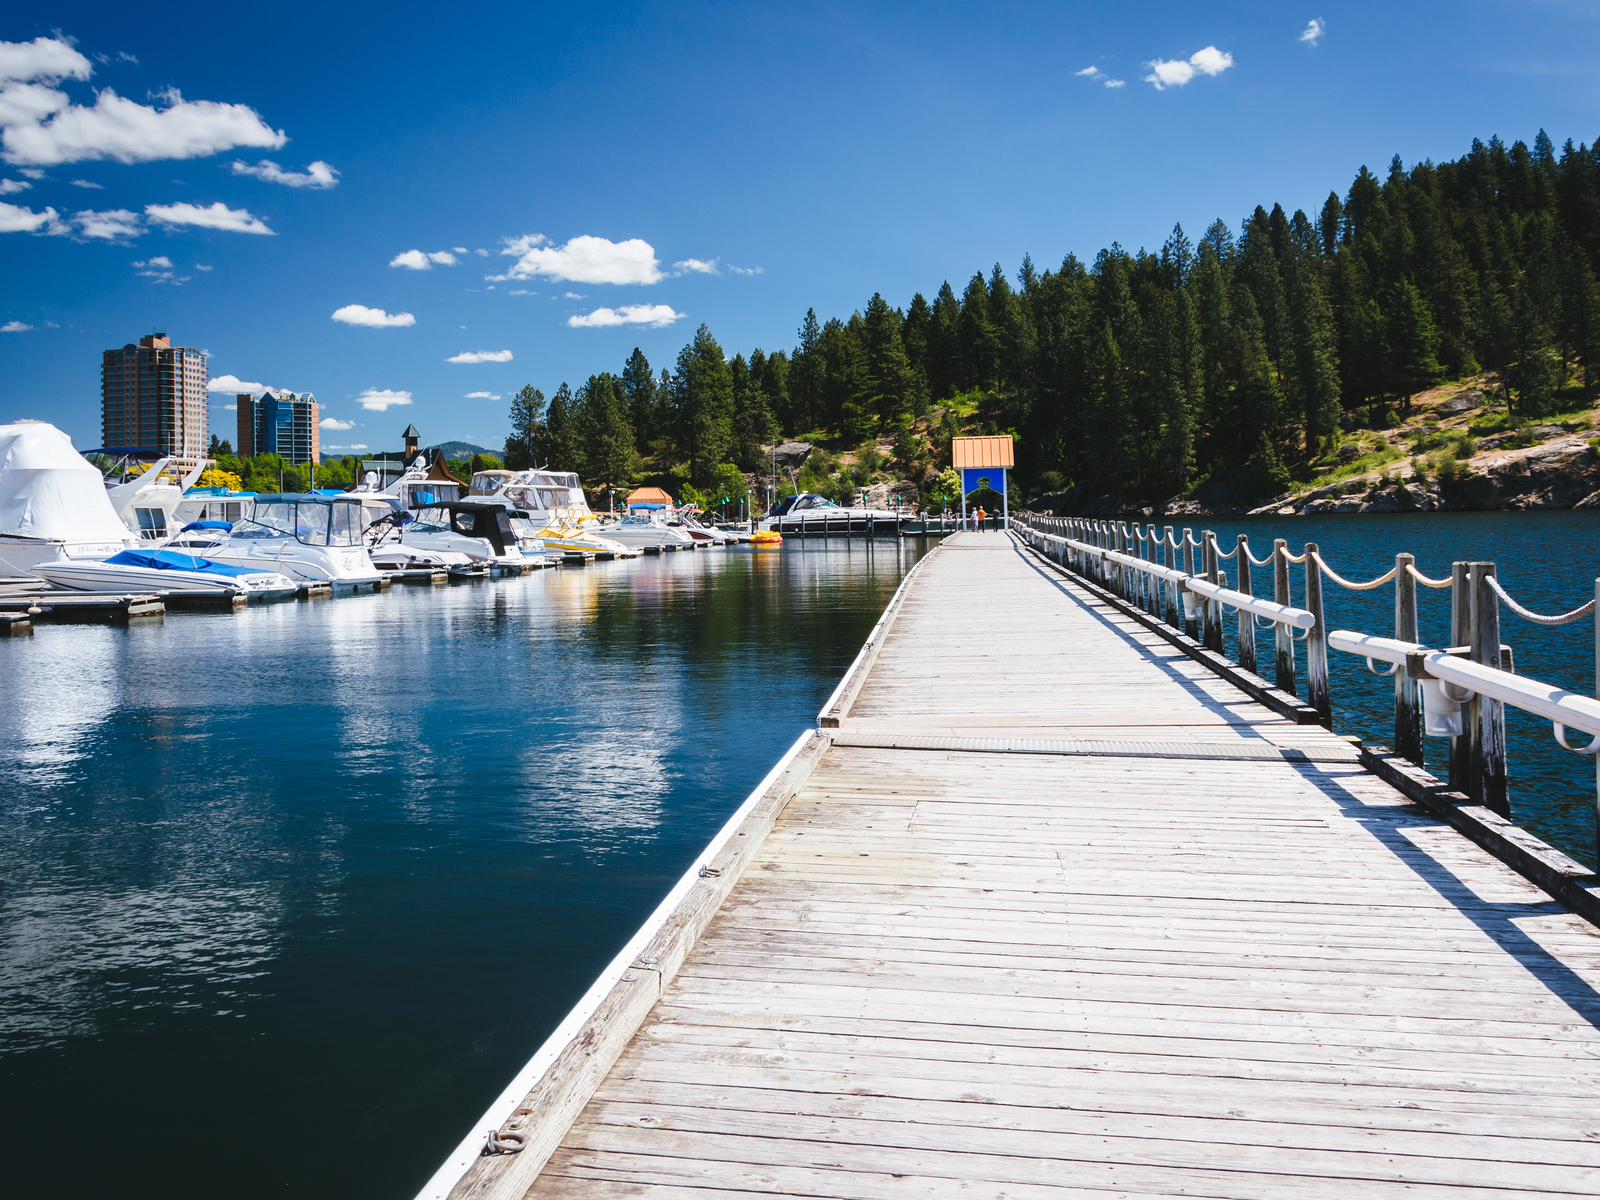 Three people standing on the end of a board walk and several boats docked at the calm Lake Coeur d' Alene, one of the best things to see in Idaho